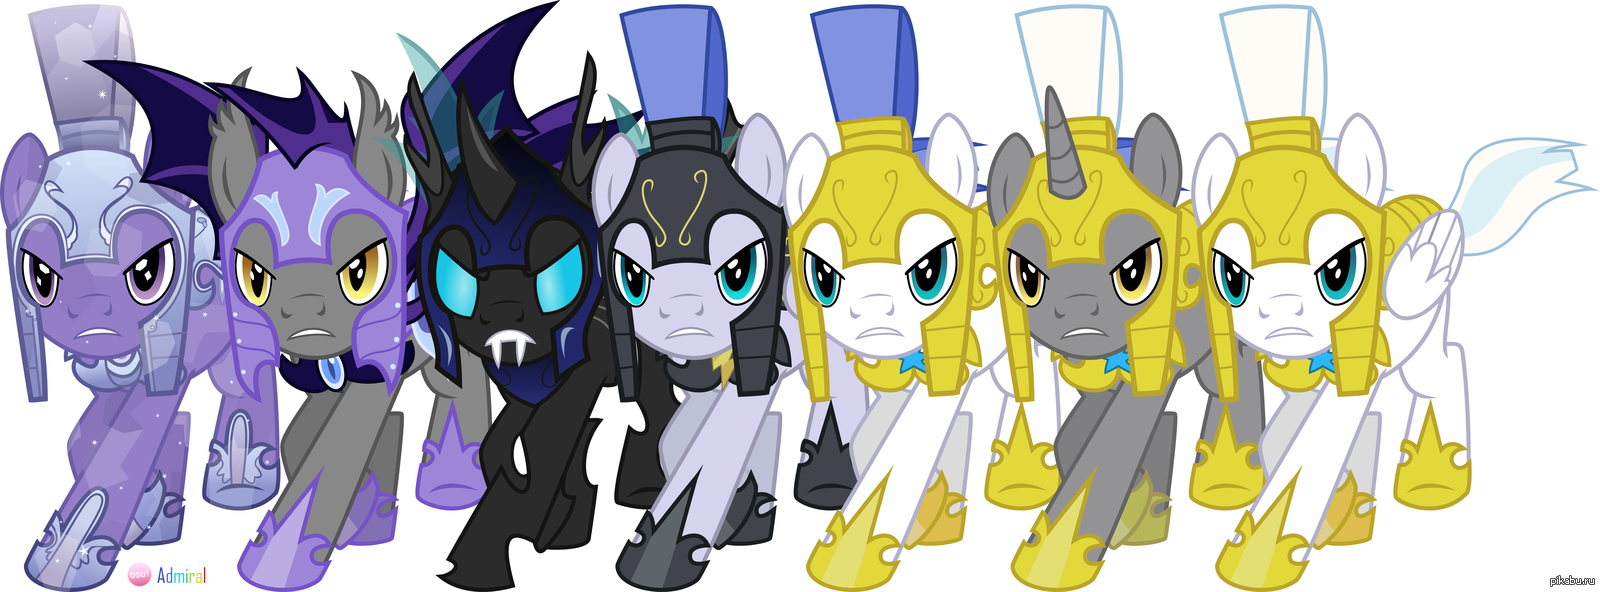 Just the tenth innocent pony picture a day. - My little pony, Osuadmiral, Mlp-Vectorclub